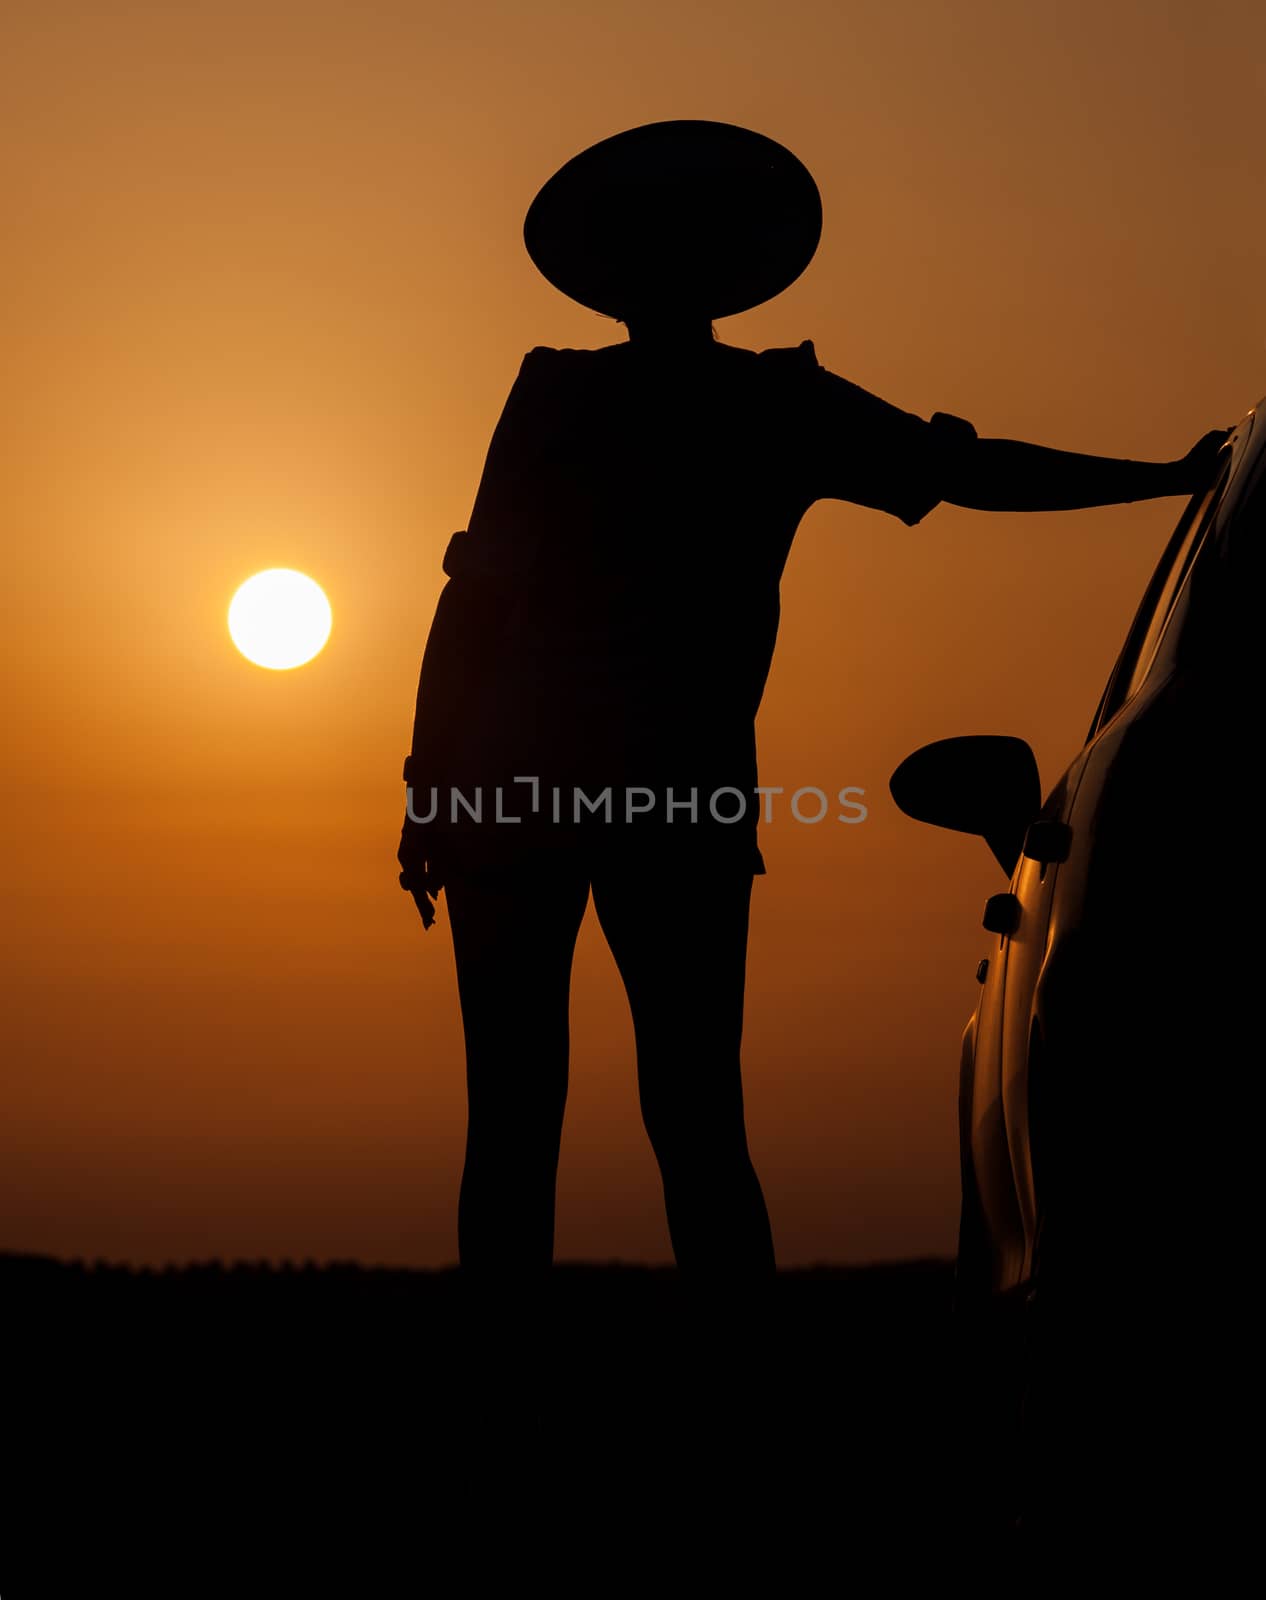 Silhouette woman with hat standing near car by Discovod